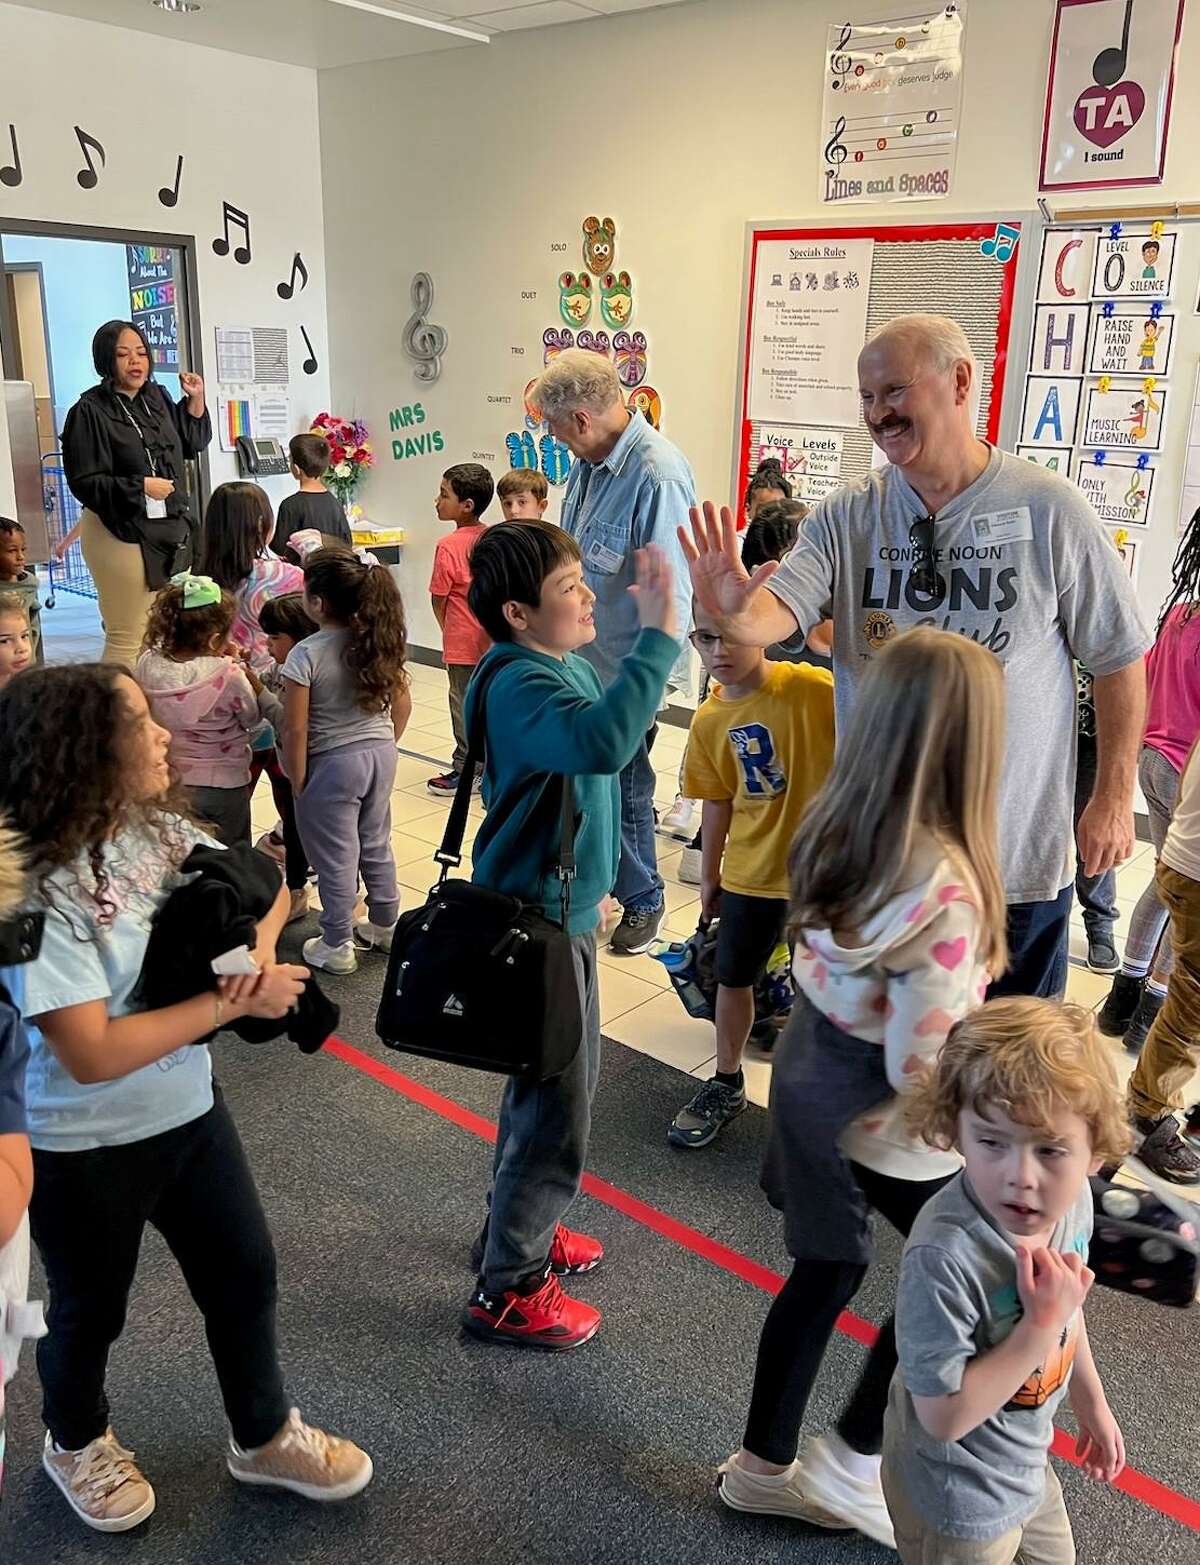 High Five - Lion Ed Roth (center) is sharing a high-five with one of the students at their adopted school, Reaves Elementary. Last week the Conroe Noon Lions Club hosted treats during the school’s grading period rewards program ‘Atten-Dance’ congratulating students on perfect attendance and conduct.